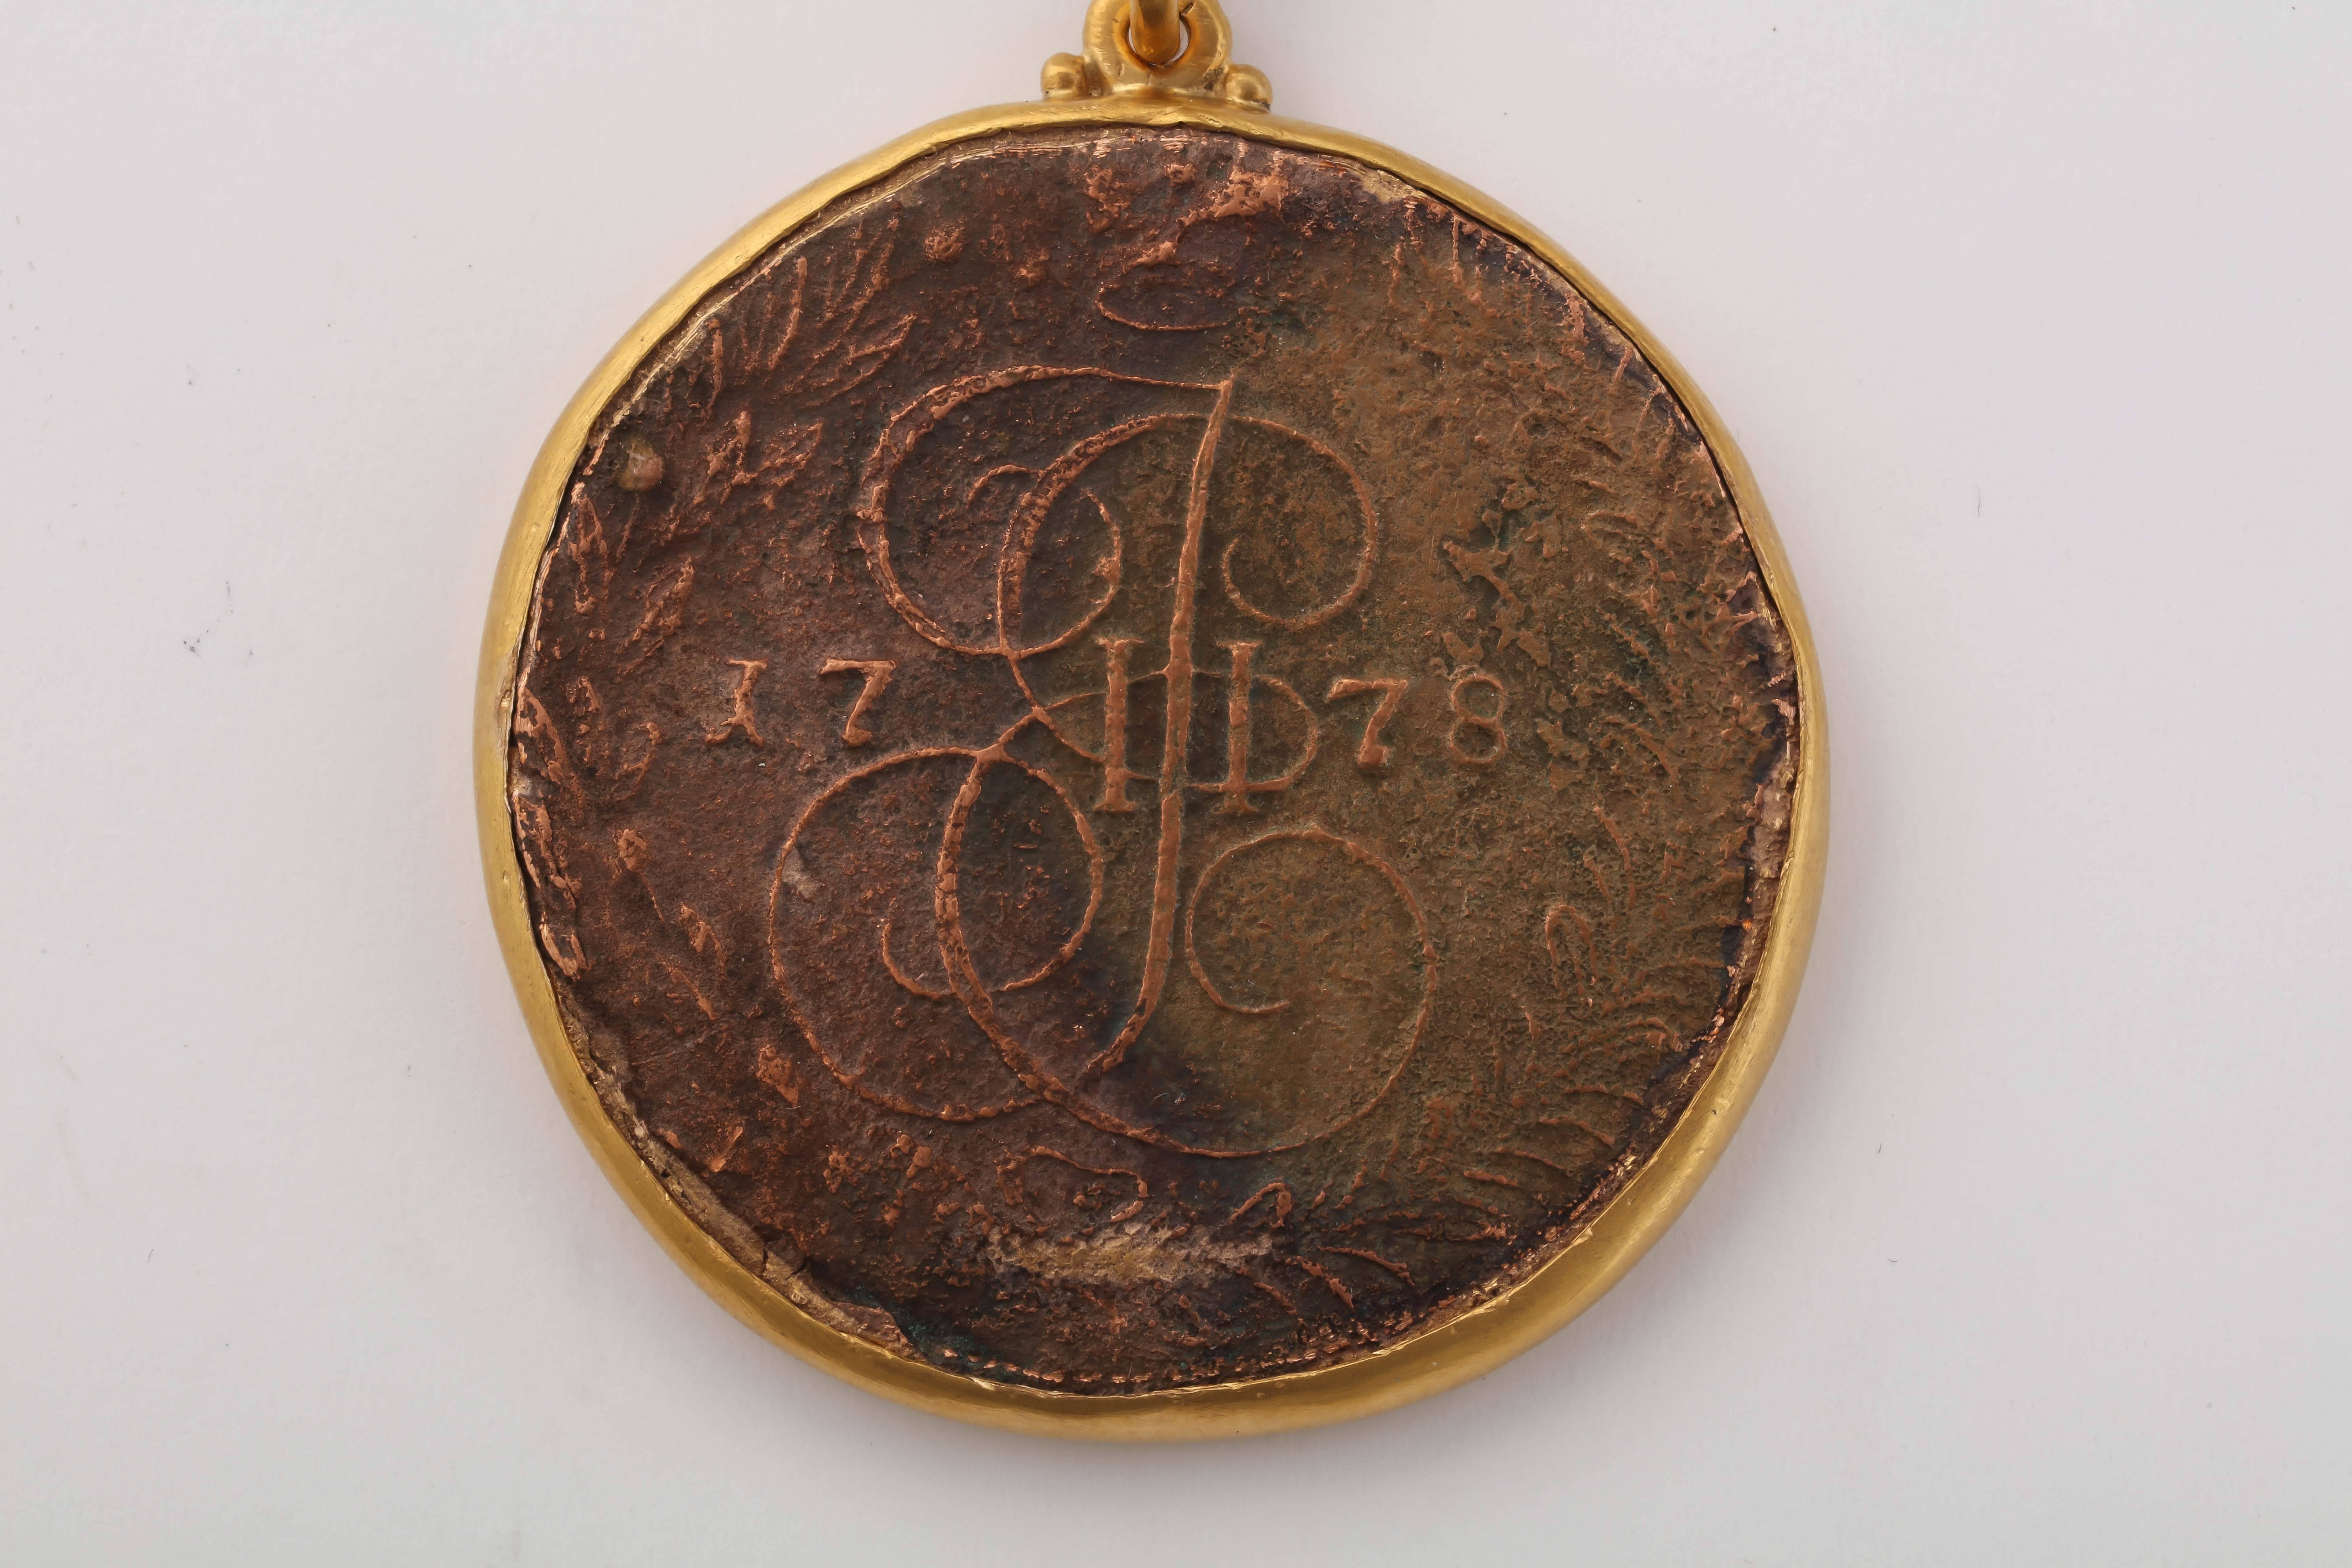 An original copper coin from the era of Empress Catherine the Great (r. 1762-96) mounted as a pendant, with the date of 1778 on the front and the Empresses' cypher, the Romanov double headed eagle on the reverse. Fine copper tone. Chain not